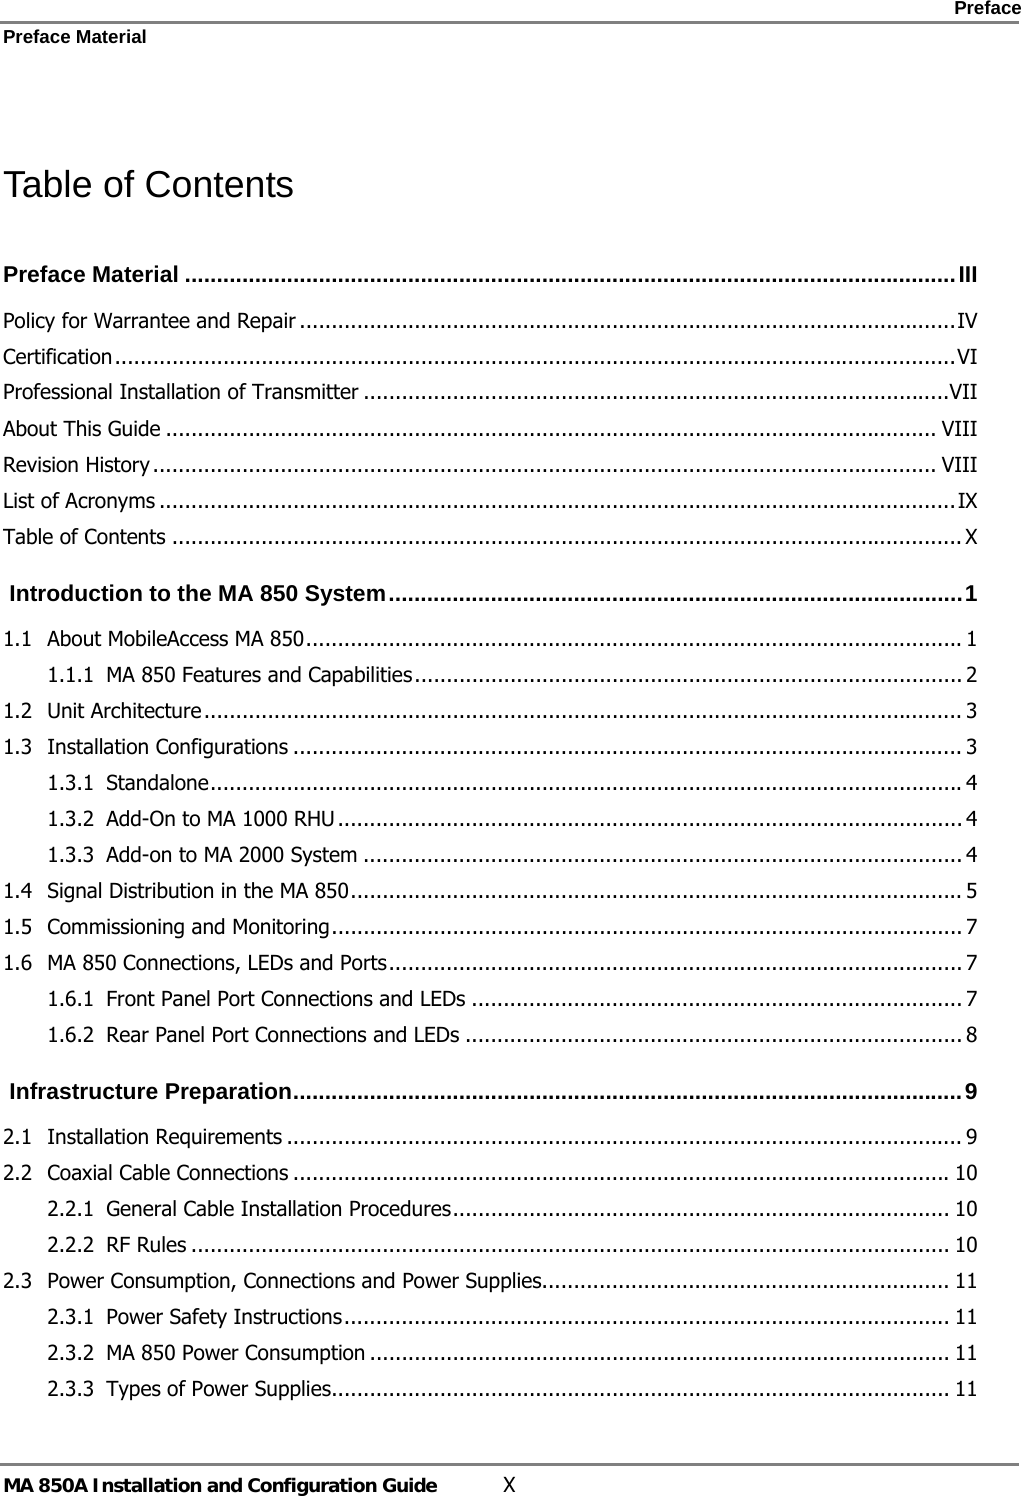    Preface Preface Material      MA 850A Installation and Configuration Guide  X  Table of Contents Preface Material .........................................................................................................................III Policy for Warrantee and Repair .......................................................................................................IV Certification....................................................................................................................................VI Professional Installation of Transmitter ............................................................................................VII About This Guide ......................................................................................................................... VIII Revision History ........................................................................................................................... VIII List of Acronyms .............................................................................................................................IX Table of Contents ............................................................................................................................ X  Introduction to the MA 850 System..........................................................................................1 1.1 About MobileAccess MA 850....................................................................................................... 1 1.1.1 MA 850 Features and Capabilities...................................................................................... 2 1.2 Unit Architecture....................................................................................................................... 3 1.3 Installation Configurations ......................................................................................................... 3 1.3.1 Standalone...................................................................................................................... 4 1.3.2 Add-On to MA 1000 RHU .................................................................................................. 4 1.3.3 Add-on to MA 2000 System .............................................................................................. 4 1.4 Signal Distribution in the MA 850................................................................................................ 5 1.5 Commissioning and Monitoring................................................................................................... 7 1.6 MA 850 Connections, LEDs and Ports.......................................................................................... 7 1.6.1 Front Panel Port Connections and LEDs ............................................................................. 7 1.6.2 Rear Panel Port Connections and LEDs .............................................................................. 8  Infrastructure Preparation.........................................................................................................9 2.1 Installation Requirements .......................................................................................................... 9 2.2 Coaxial Cable Connections .......................................................................................................10 2.2.1 General Cable Installation Procedures.............................................................................. 10 2.2.2 RF Rules ....................................................................................................................... 10 2.3 Power Consumption, Connections and Power Supplies................................................................ 11 2.3.1 Power Safety Instructions............................................................................................... 11 2.3.2 MA 850 Power Consumption ........................................................................................... 11 2.3.3 Types of Power Supplies................................................................................................. 11 